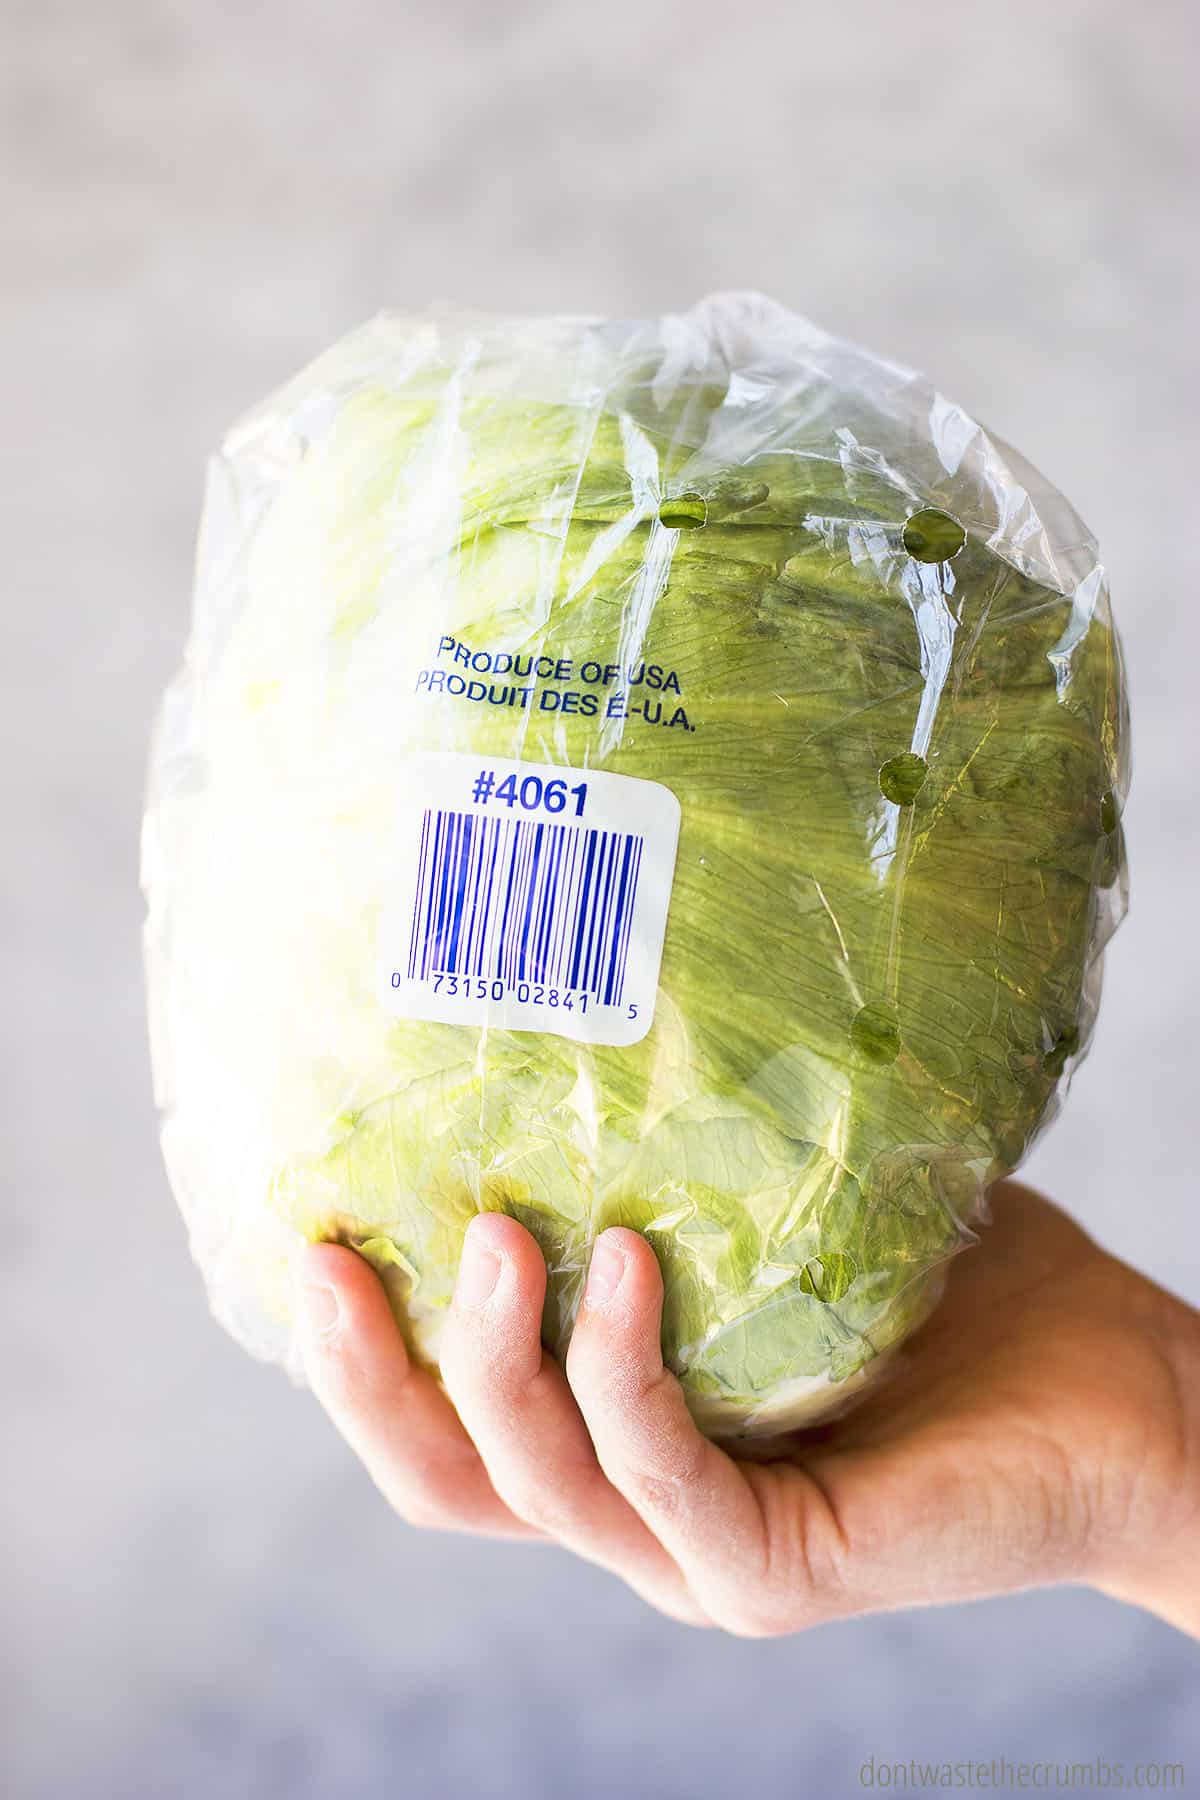 Lettuce with a PLU code.